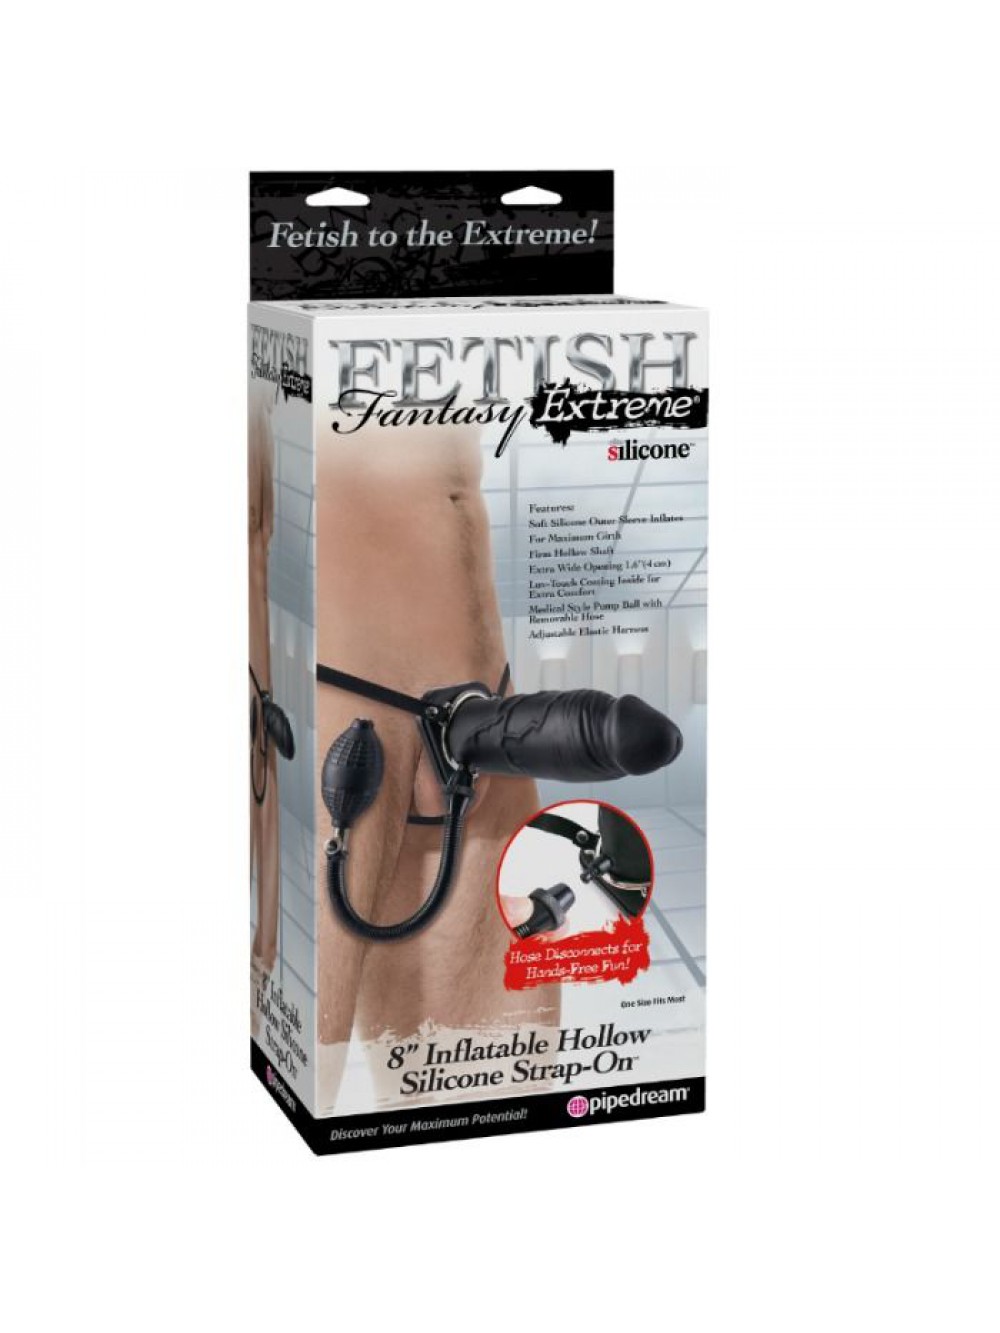 EXTREME 8" INFLATABLE HOLLOW SILICONE STRAP-ON